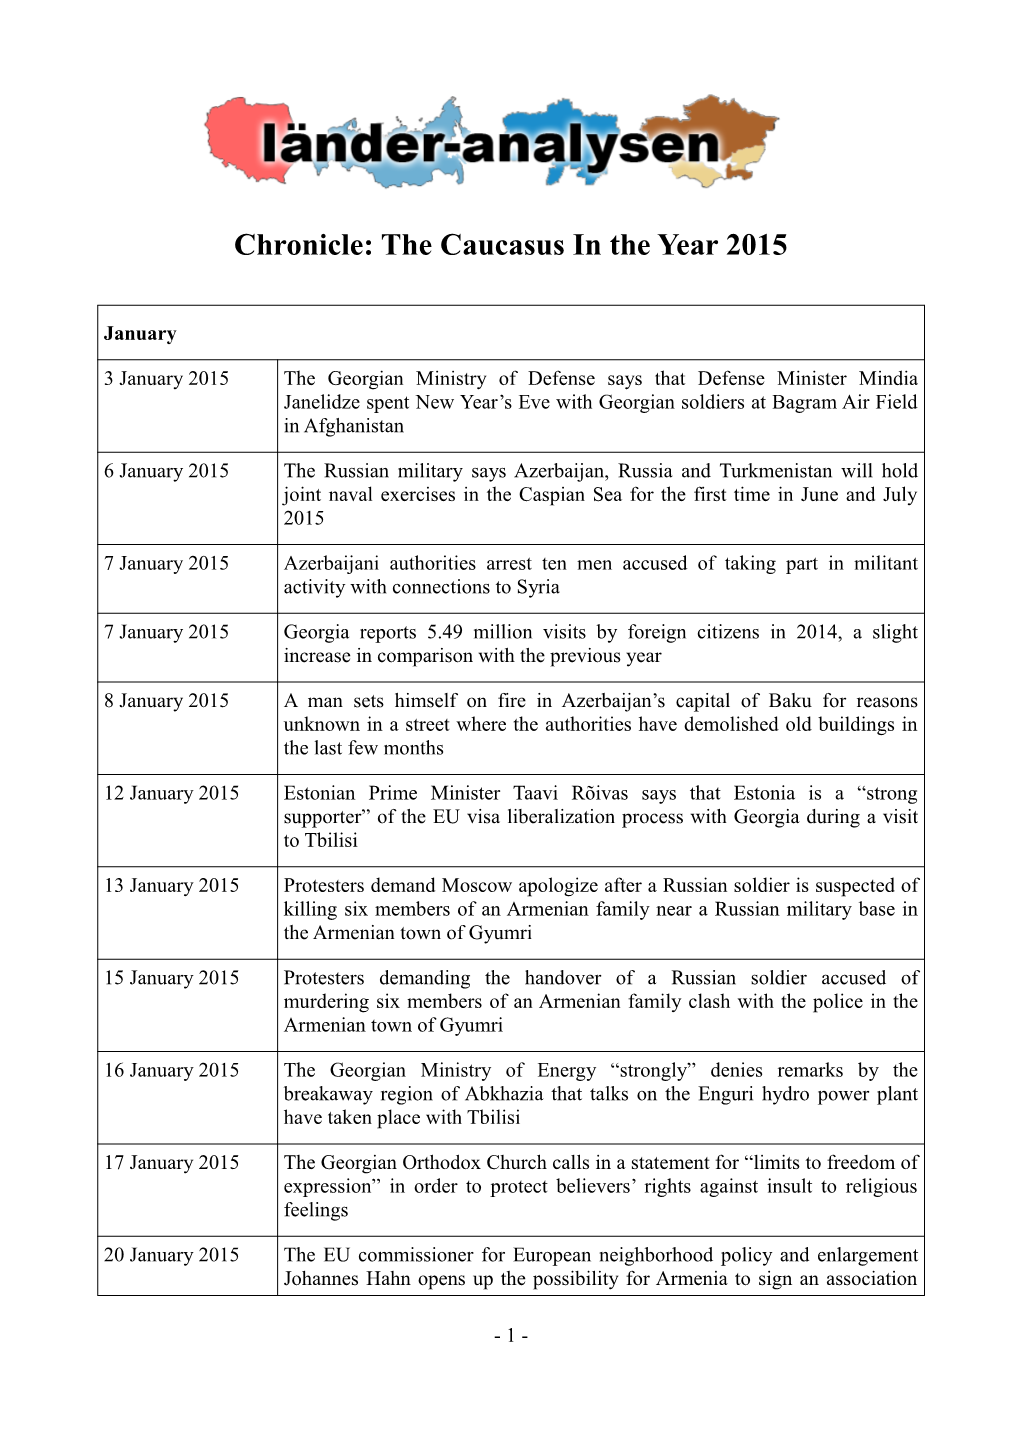 Chronicle: the Caucasus in the Year 2015